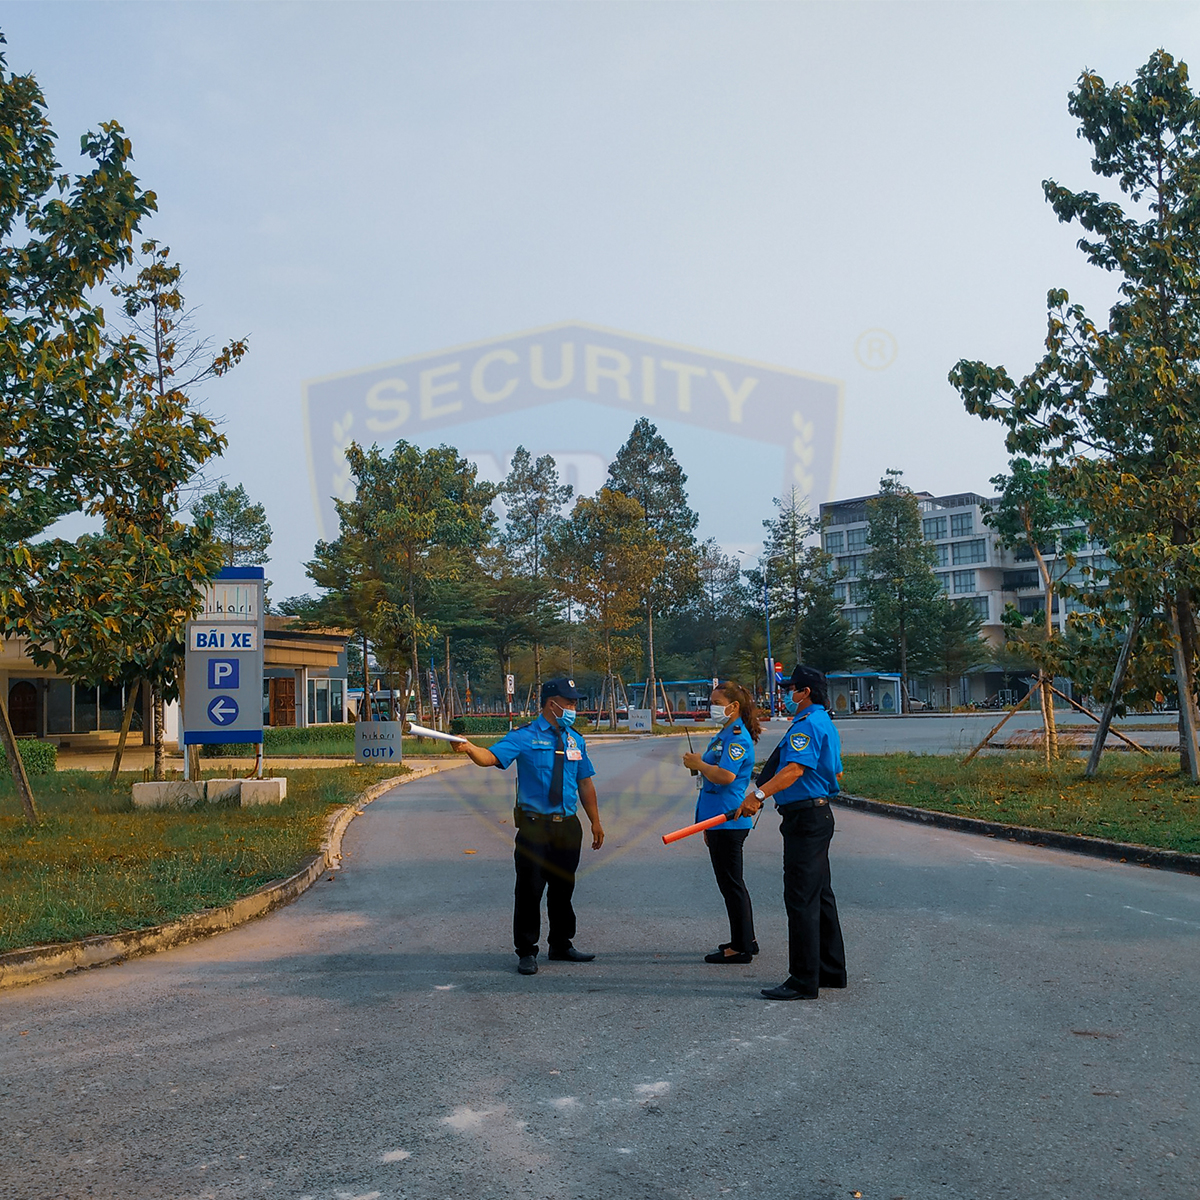 Security guards patrol the area around the event